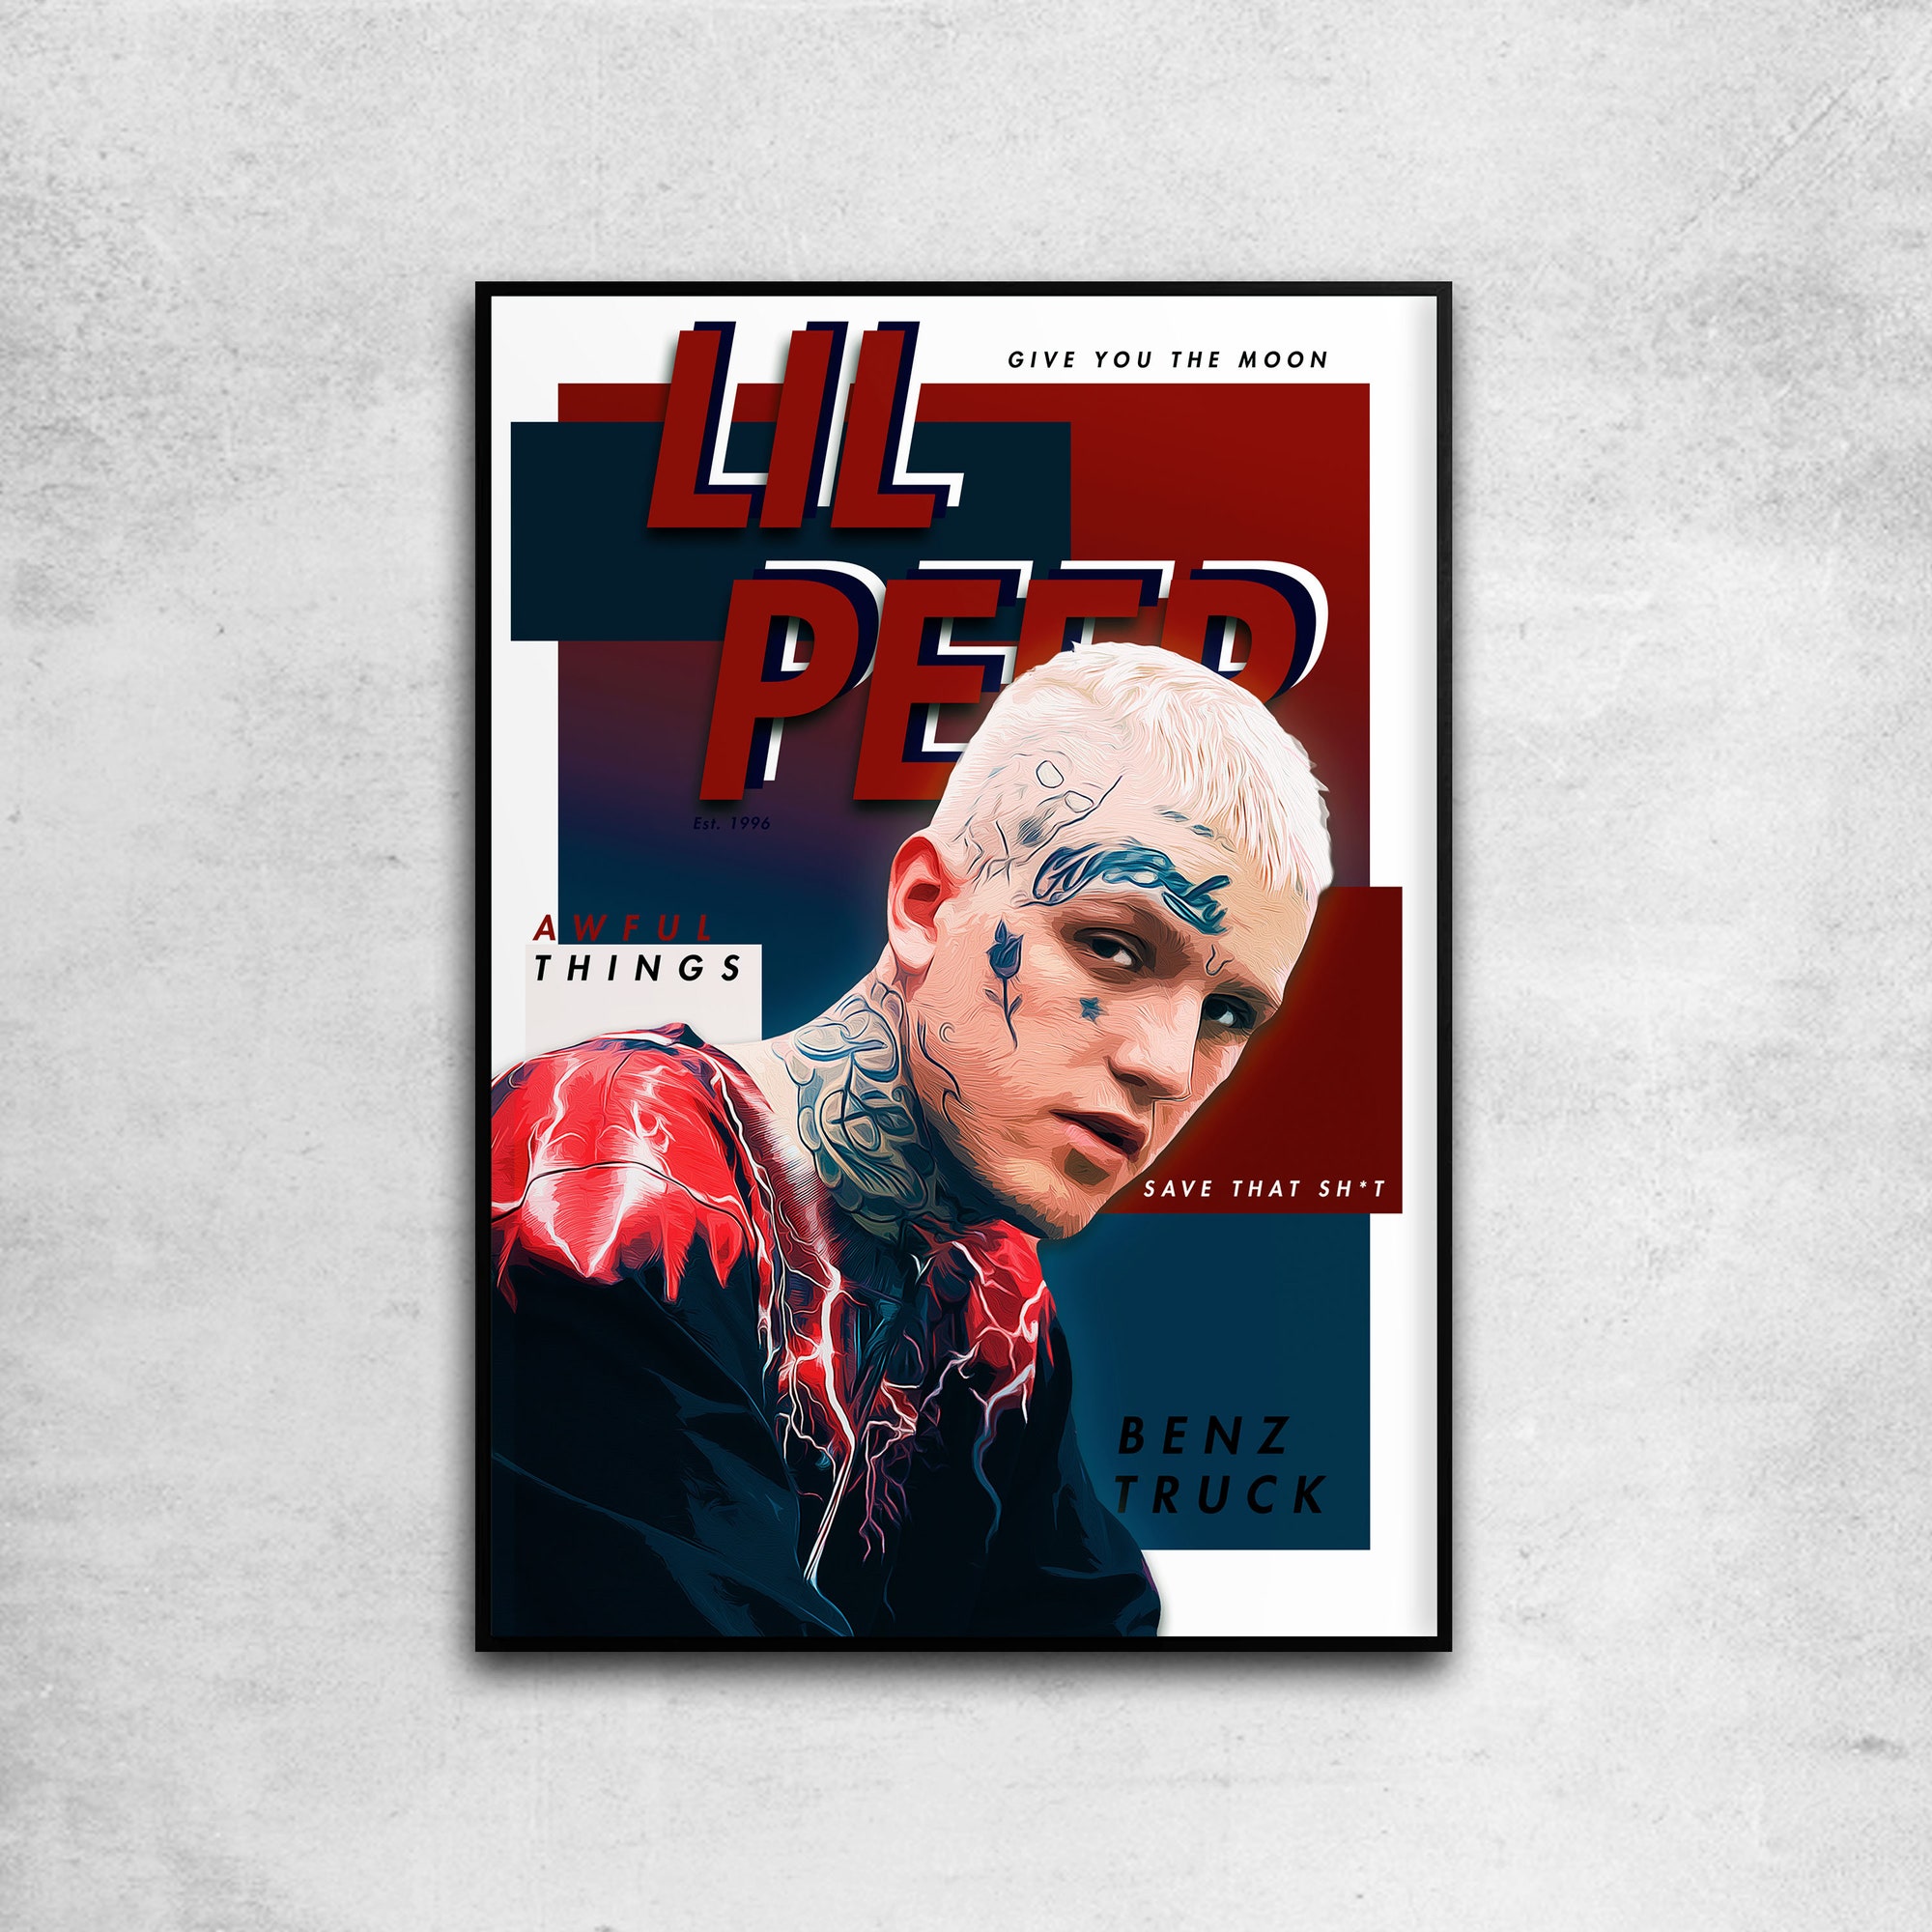 Lil Peep Poster Print with Customisable Song Titles | Emo Rap Poster, Rap, HellBoy Album Cover